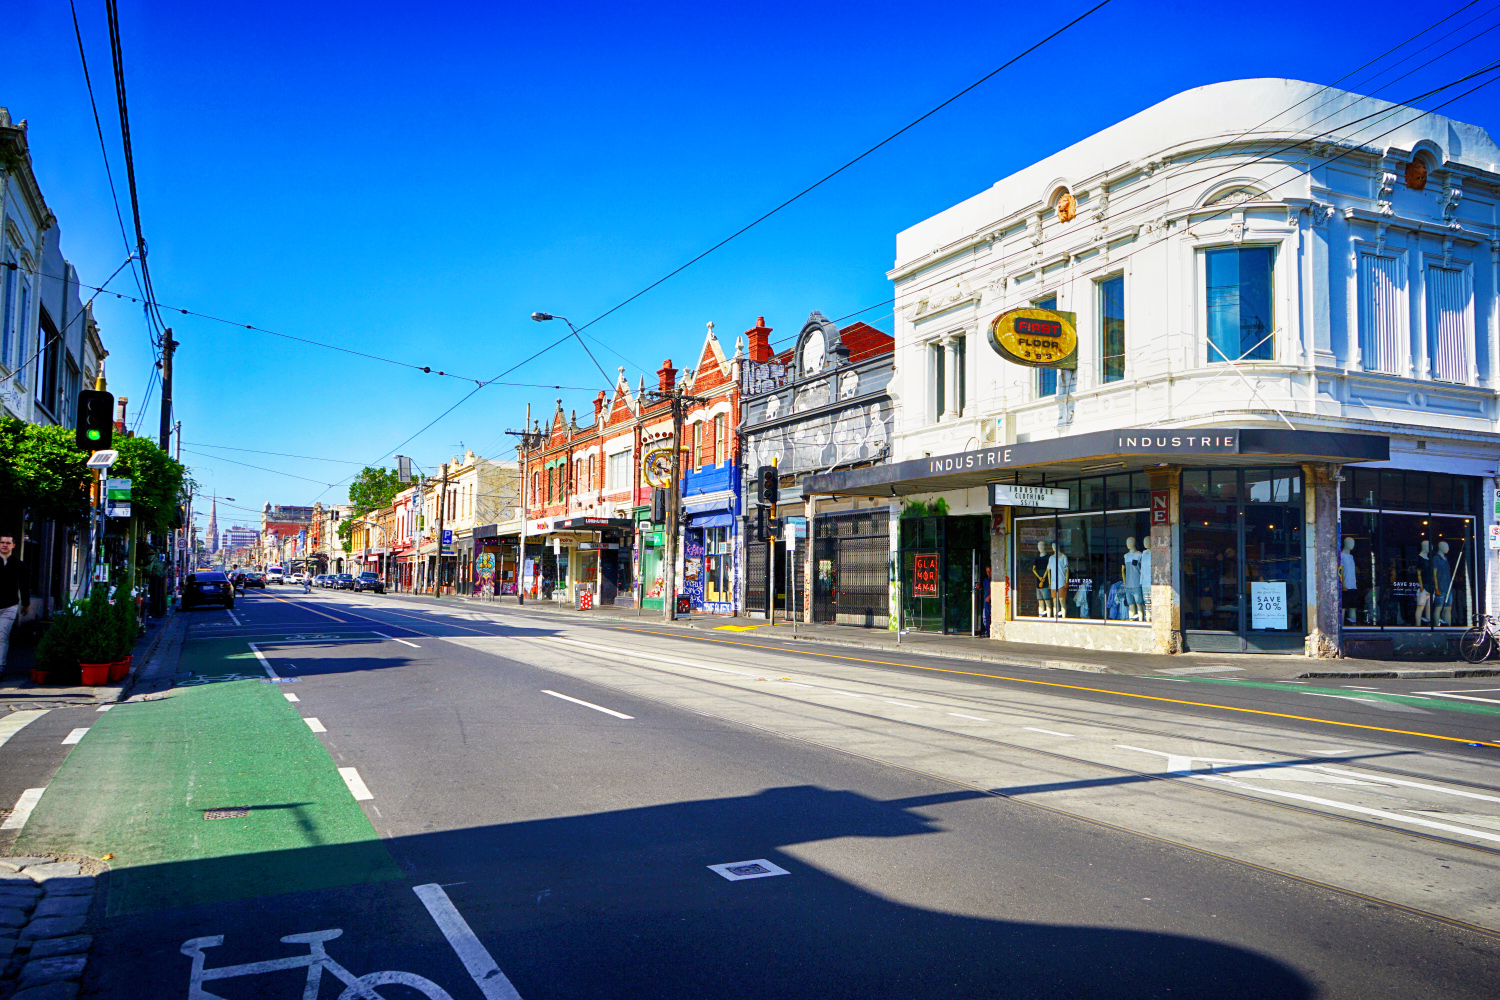 A panoramic view of Brunswick Street on an abnormally quiet day. The sky is blue, the road is empty, and the Victorian architecture is encased in street art and graffiti